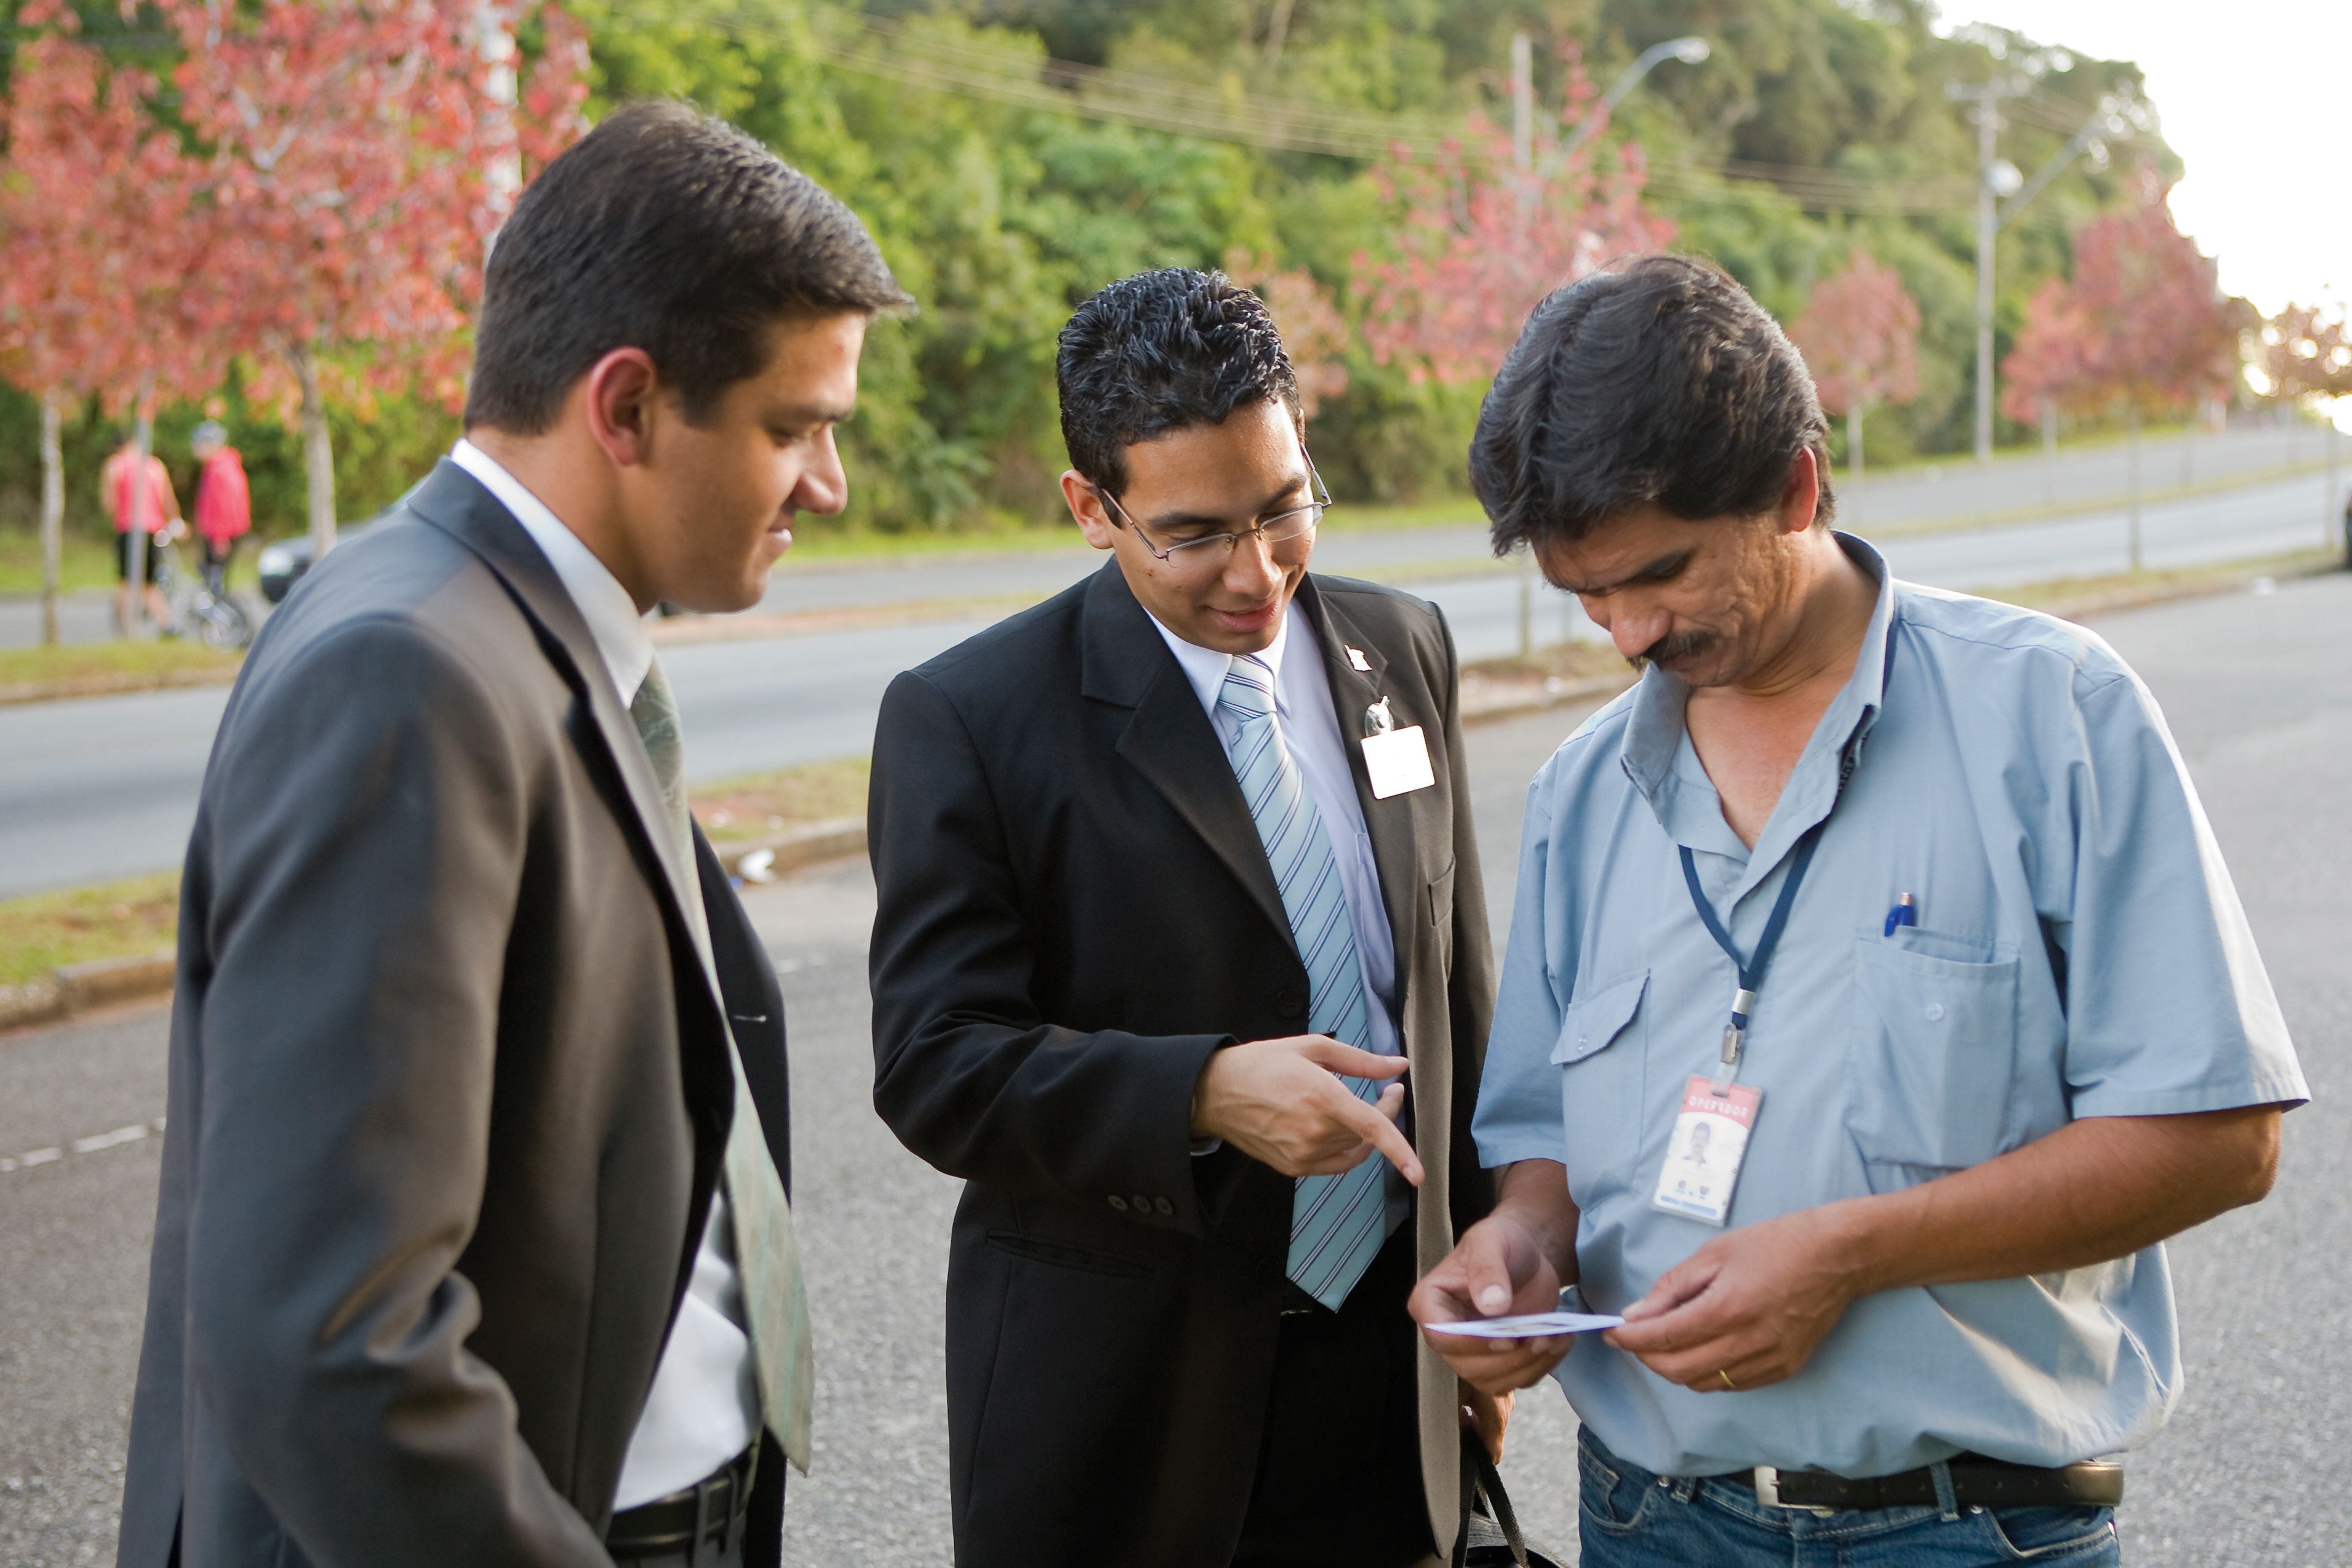 Elder missionaries giving a pass-along card to a man on the street.